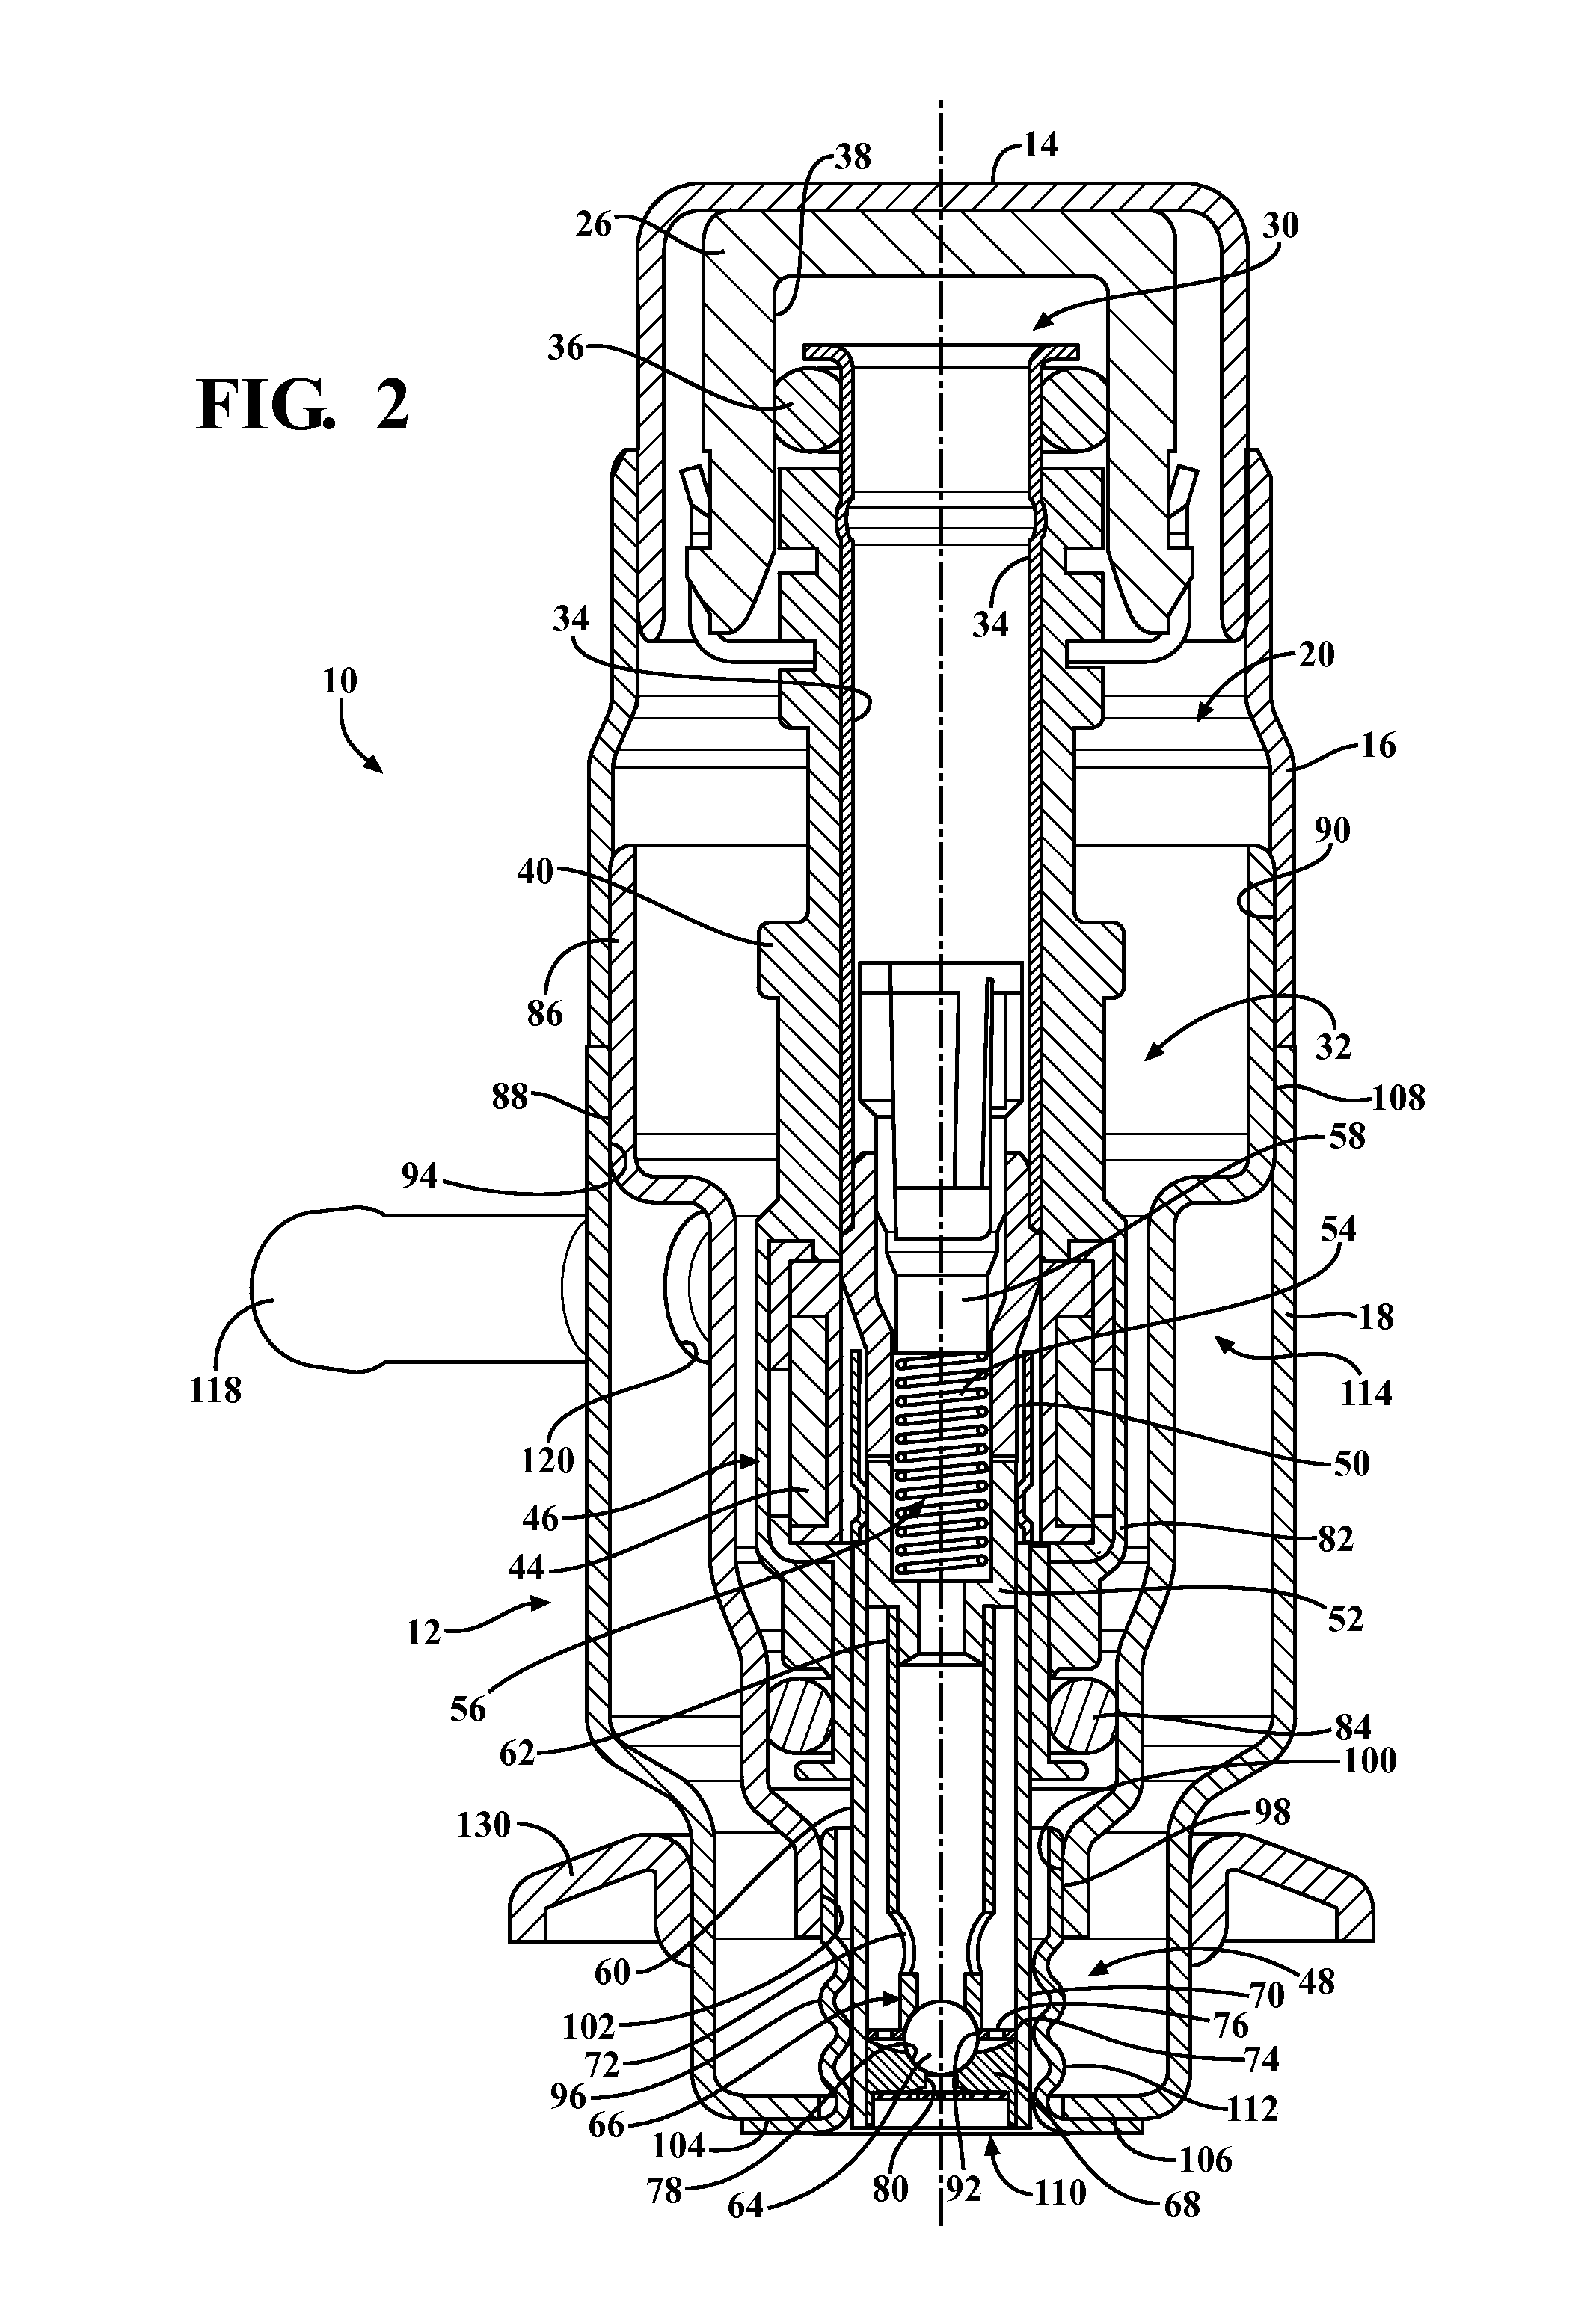 Liquid cooled reductant delivery unit for automotive selective catalytic reduction systems